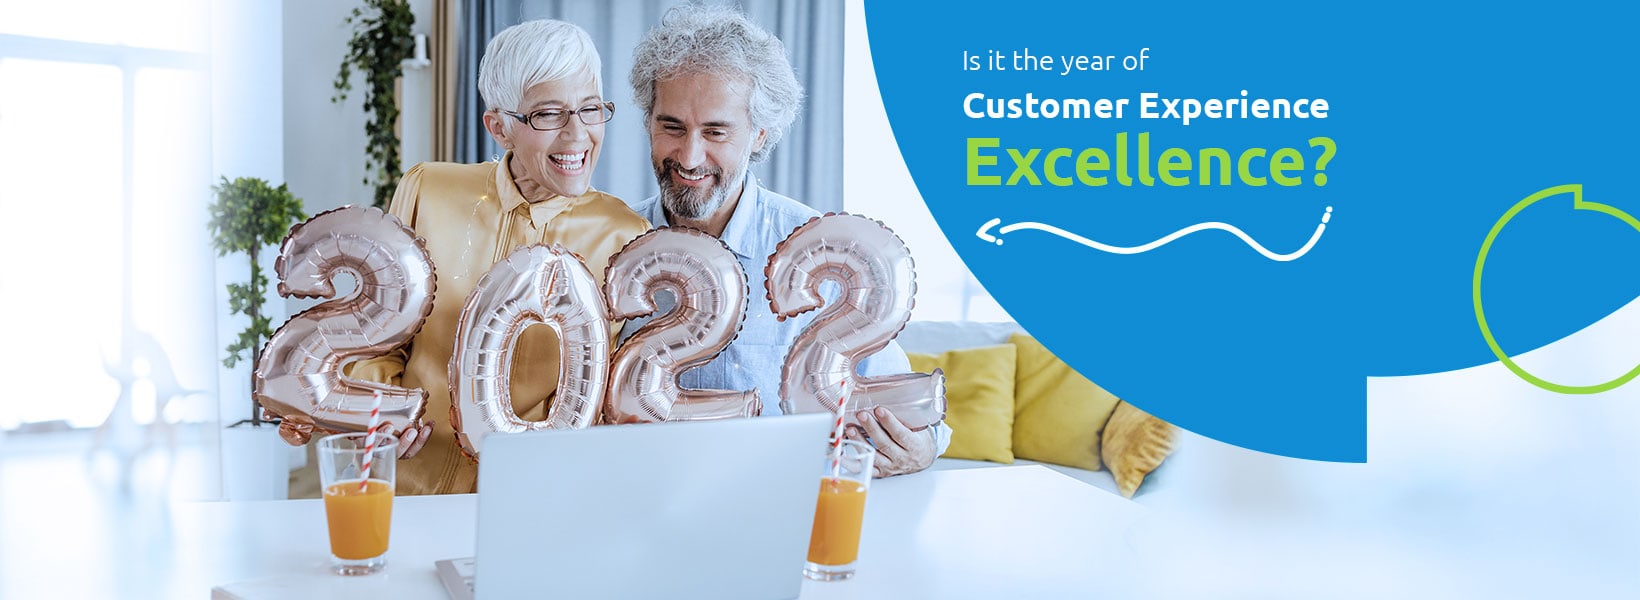 Digital Customer Experience Excellence